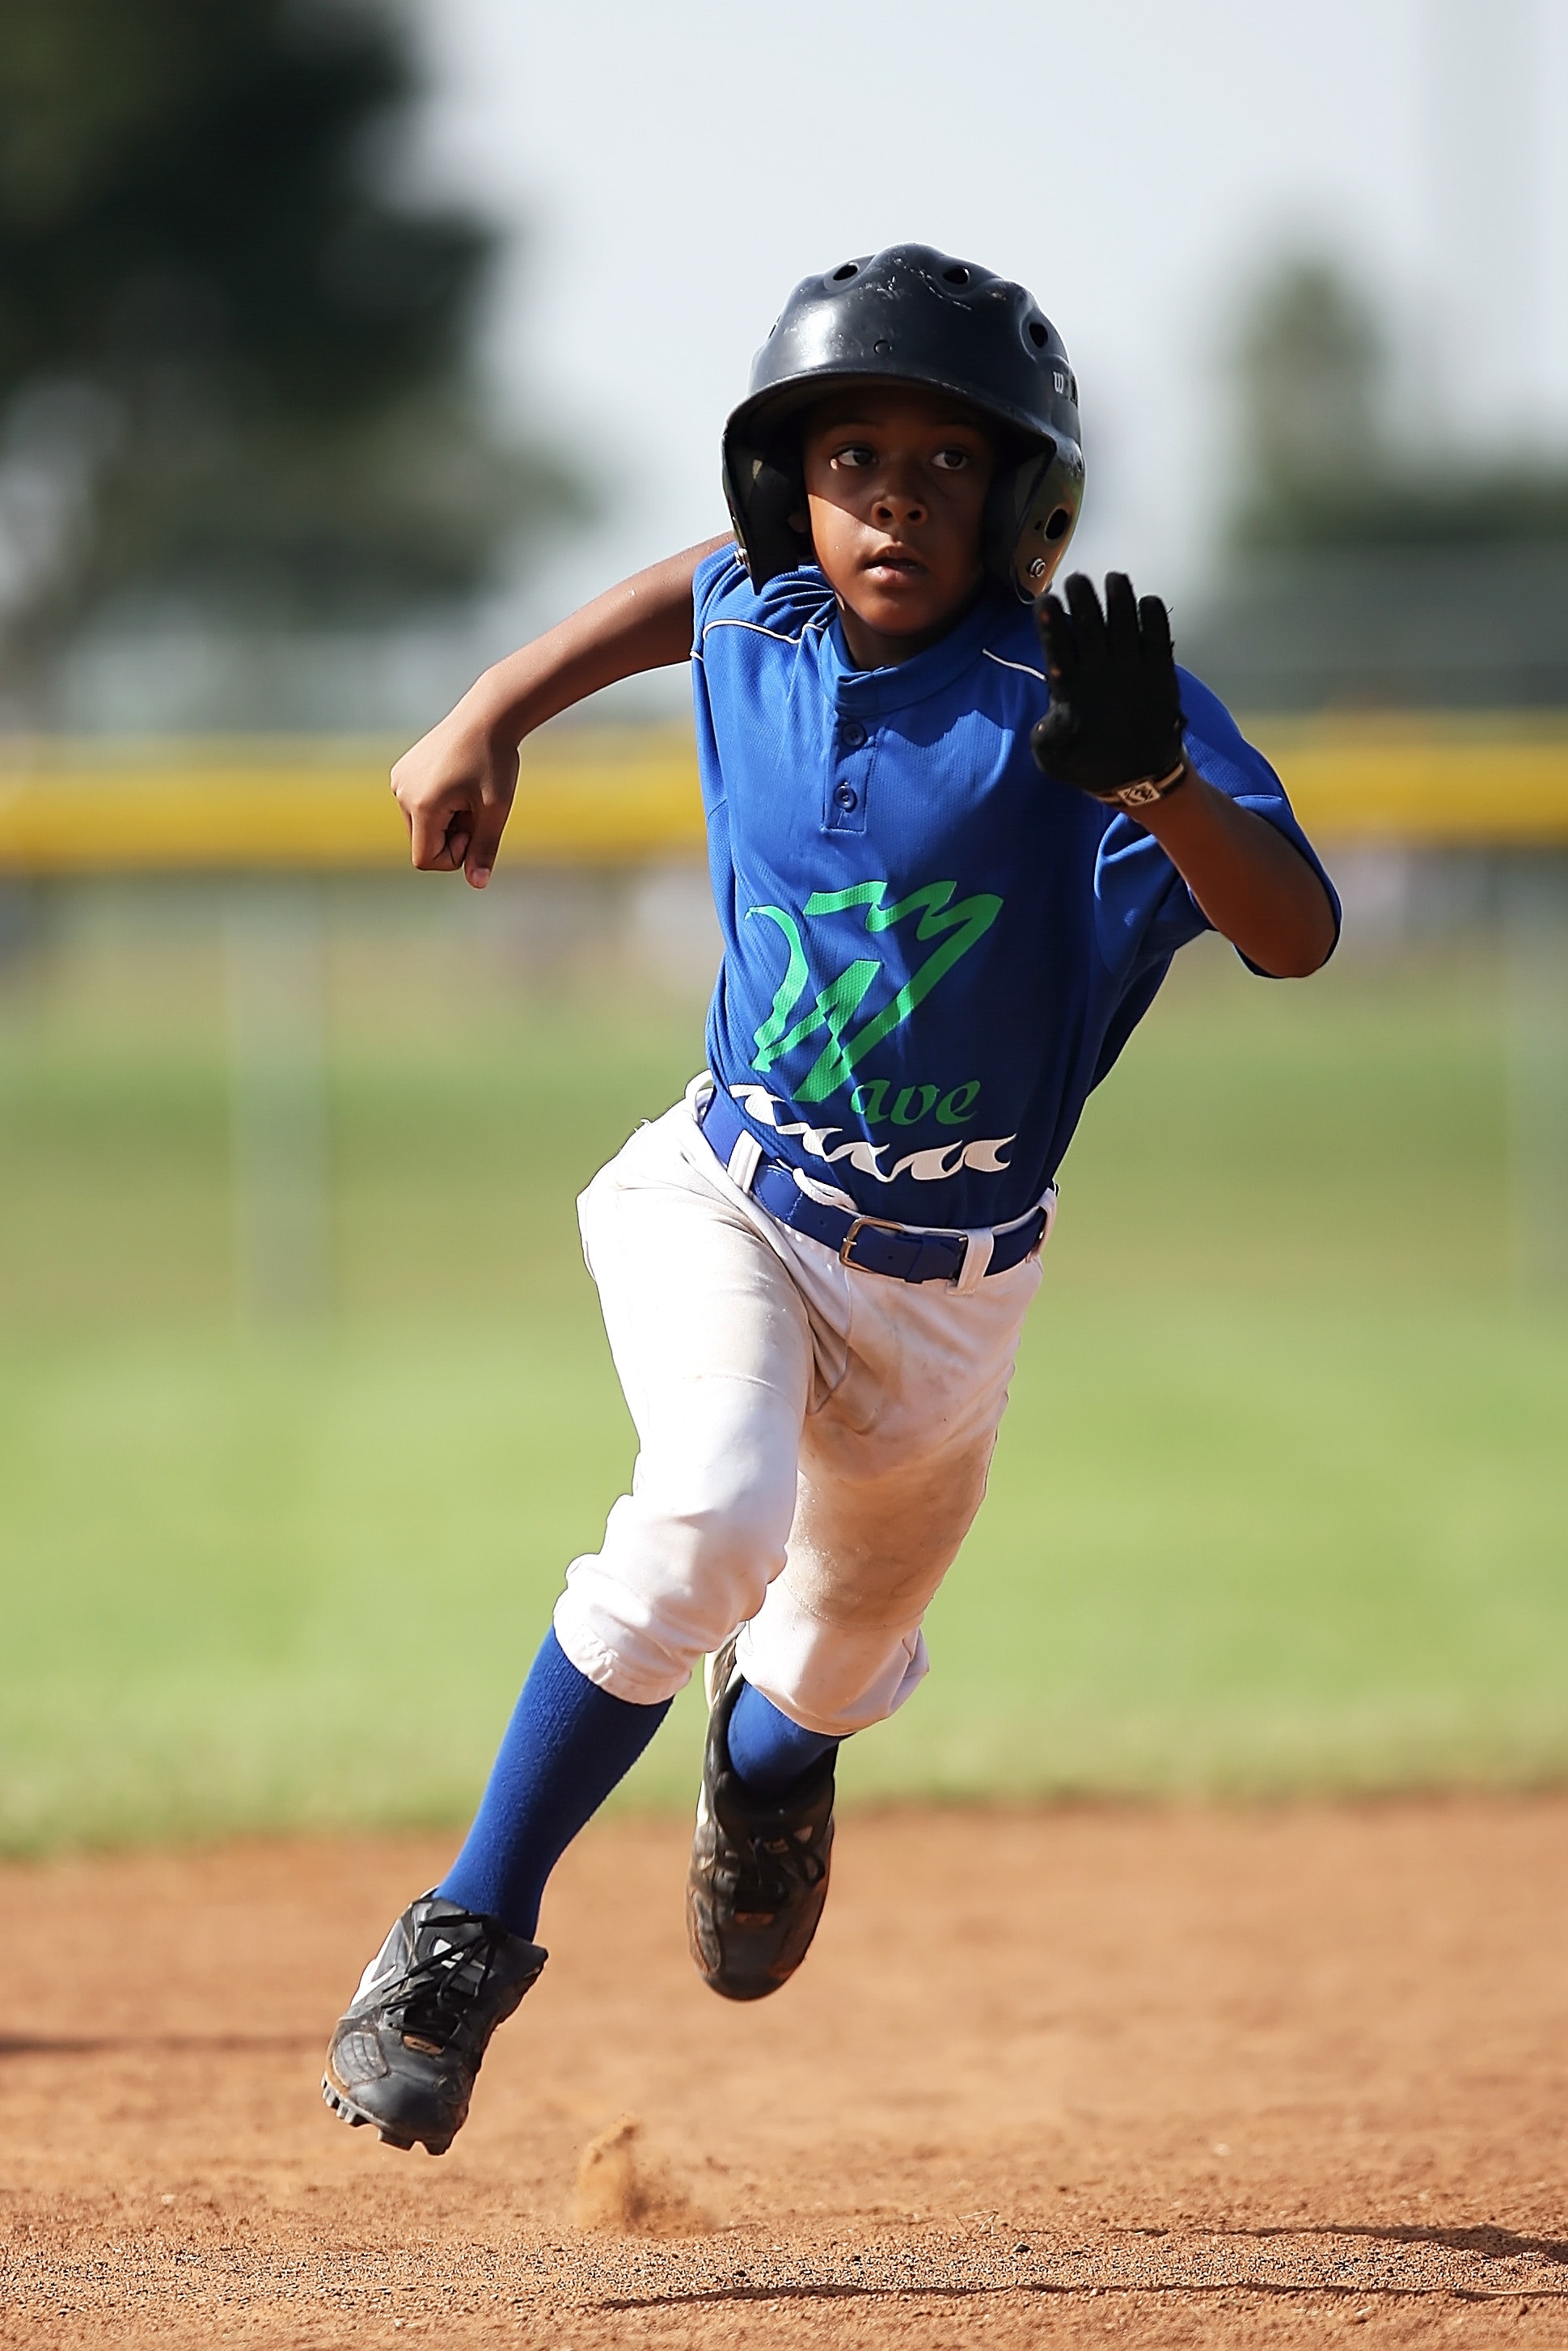 Boy in blue and white baseball jersey running on brown soil field during daytime photo